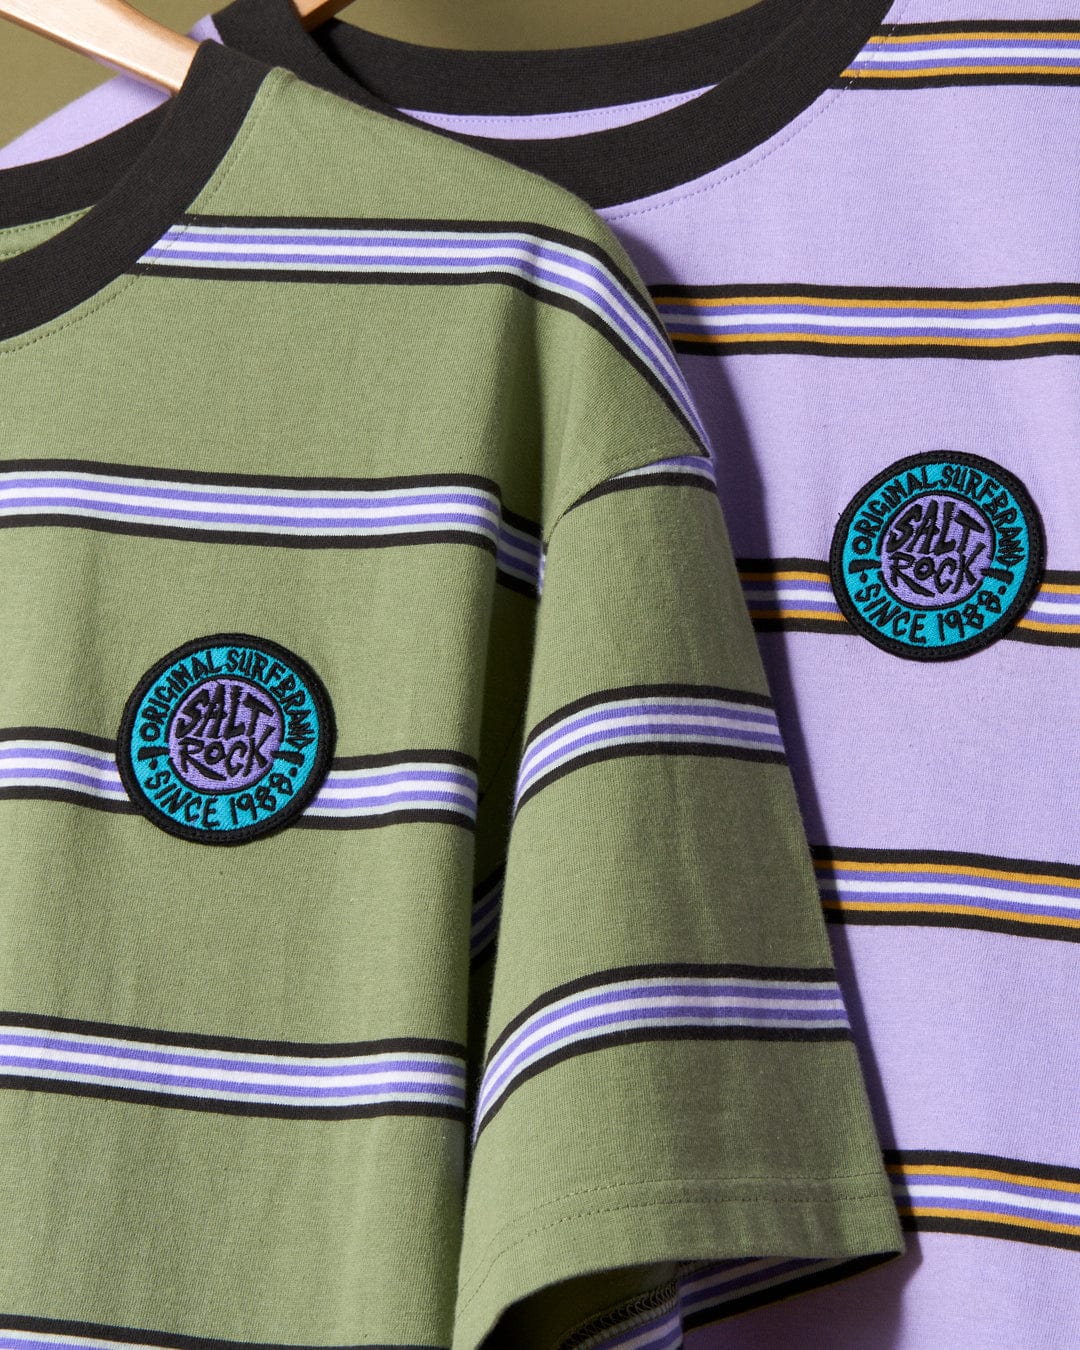 Striped cotton SR Original - Mens Short Sleeve T-Shirts with Saltrock logo patches on display.